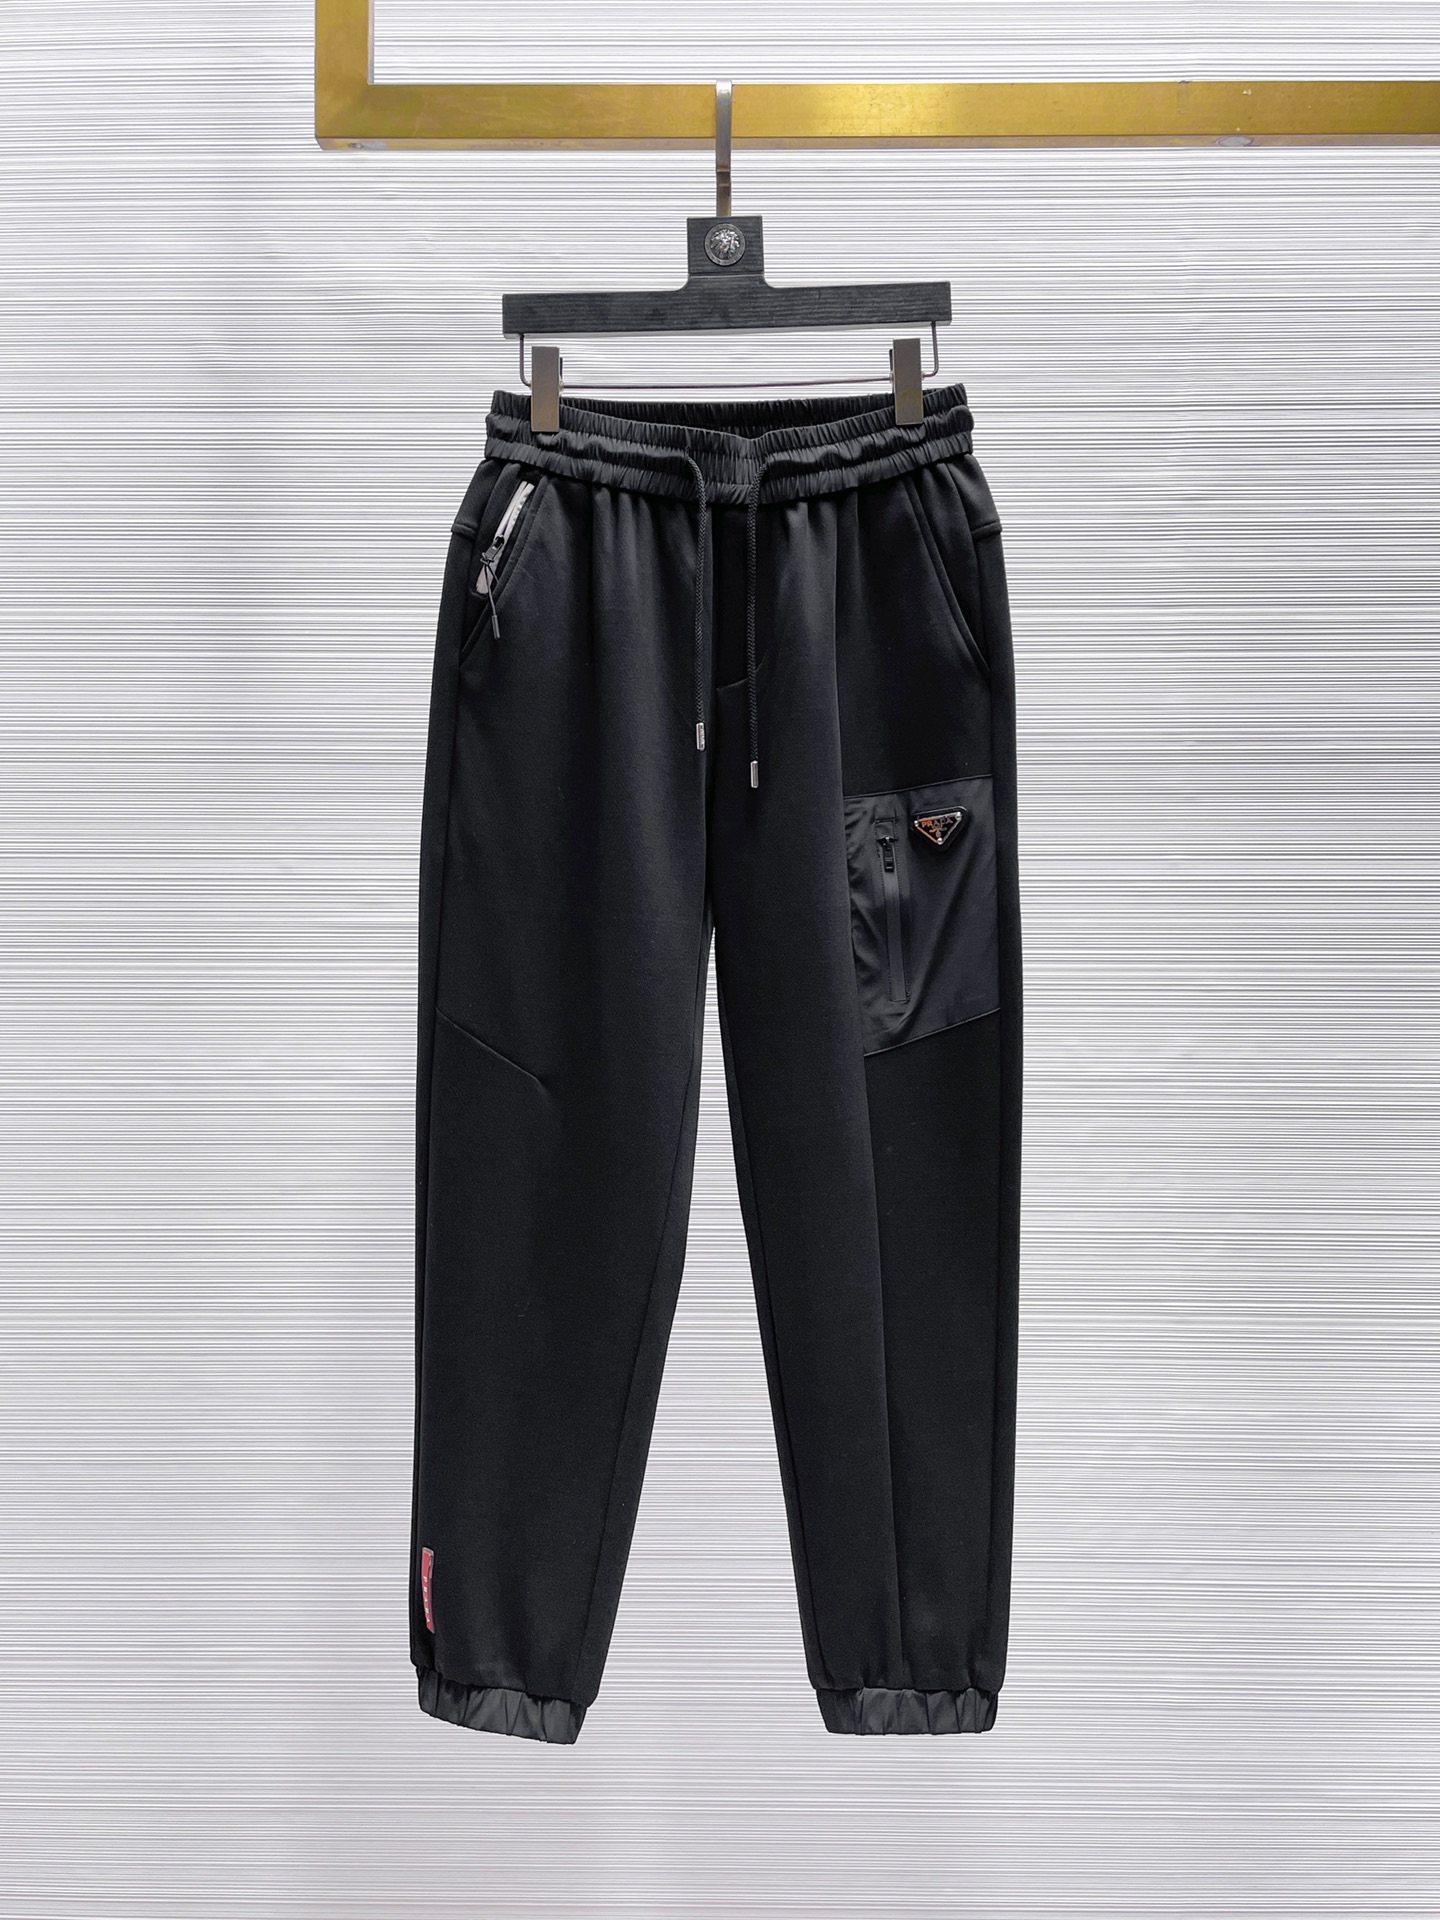 Prada Clothing Pants & Trousers Best Capucines Replica
 Spring Collection Casual